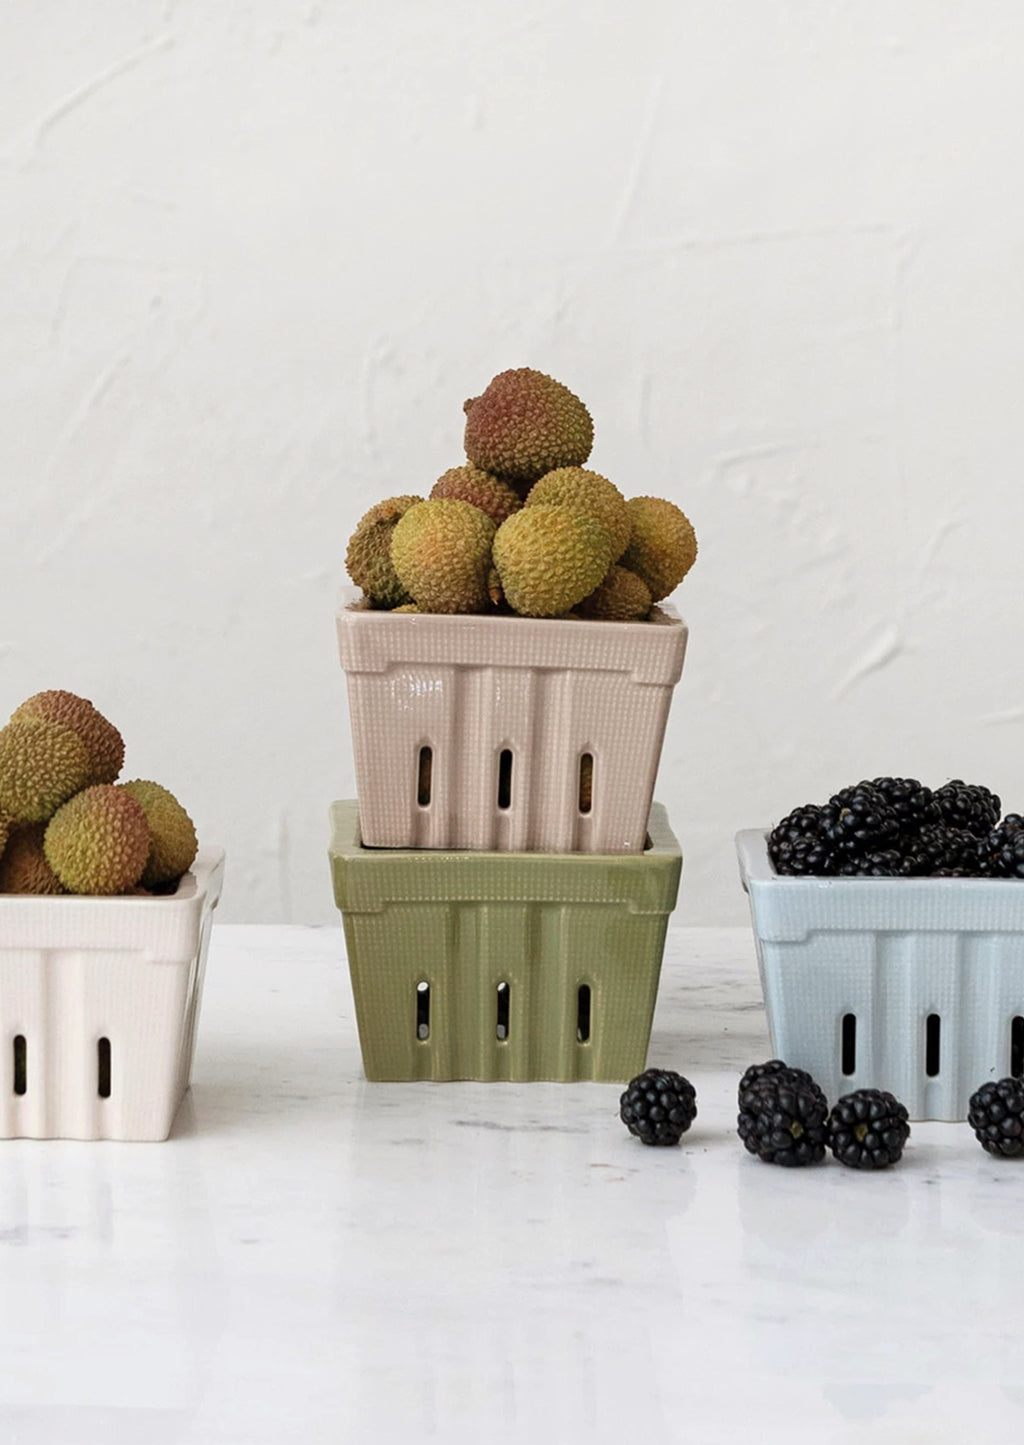 1: Ceramic berry baskets in a mix of pastel colors.